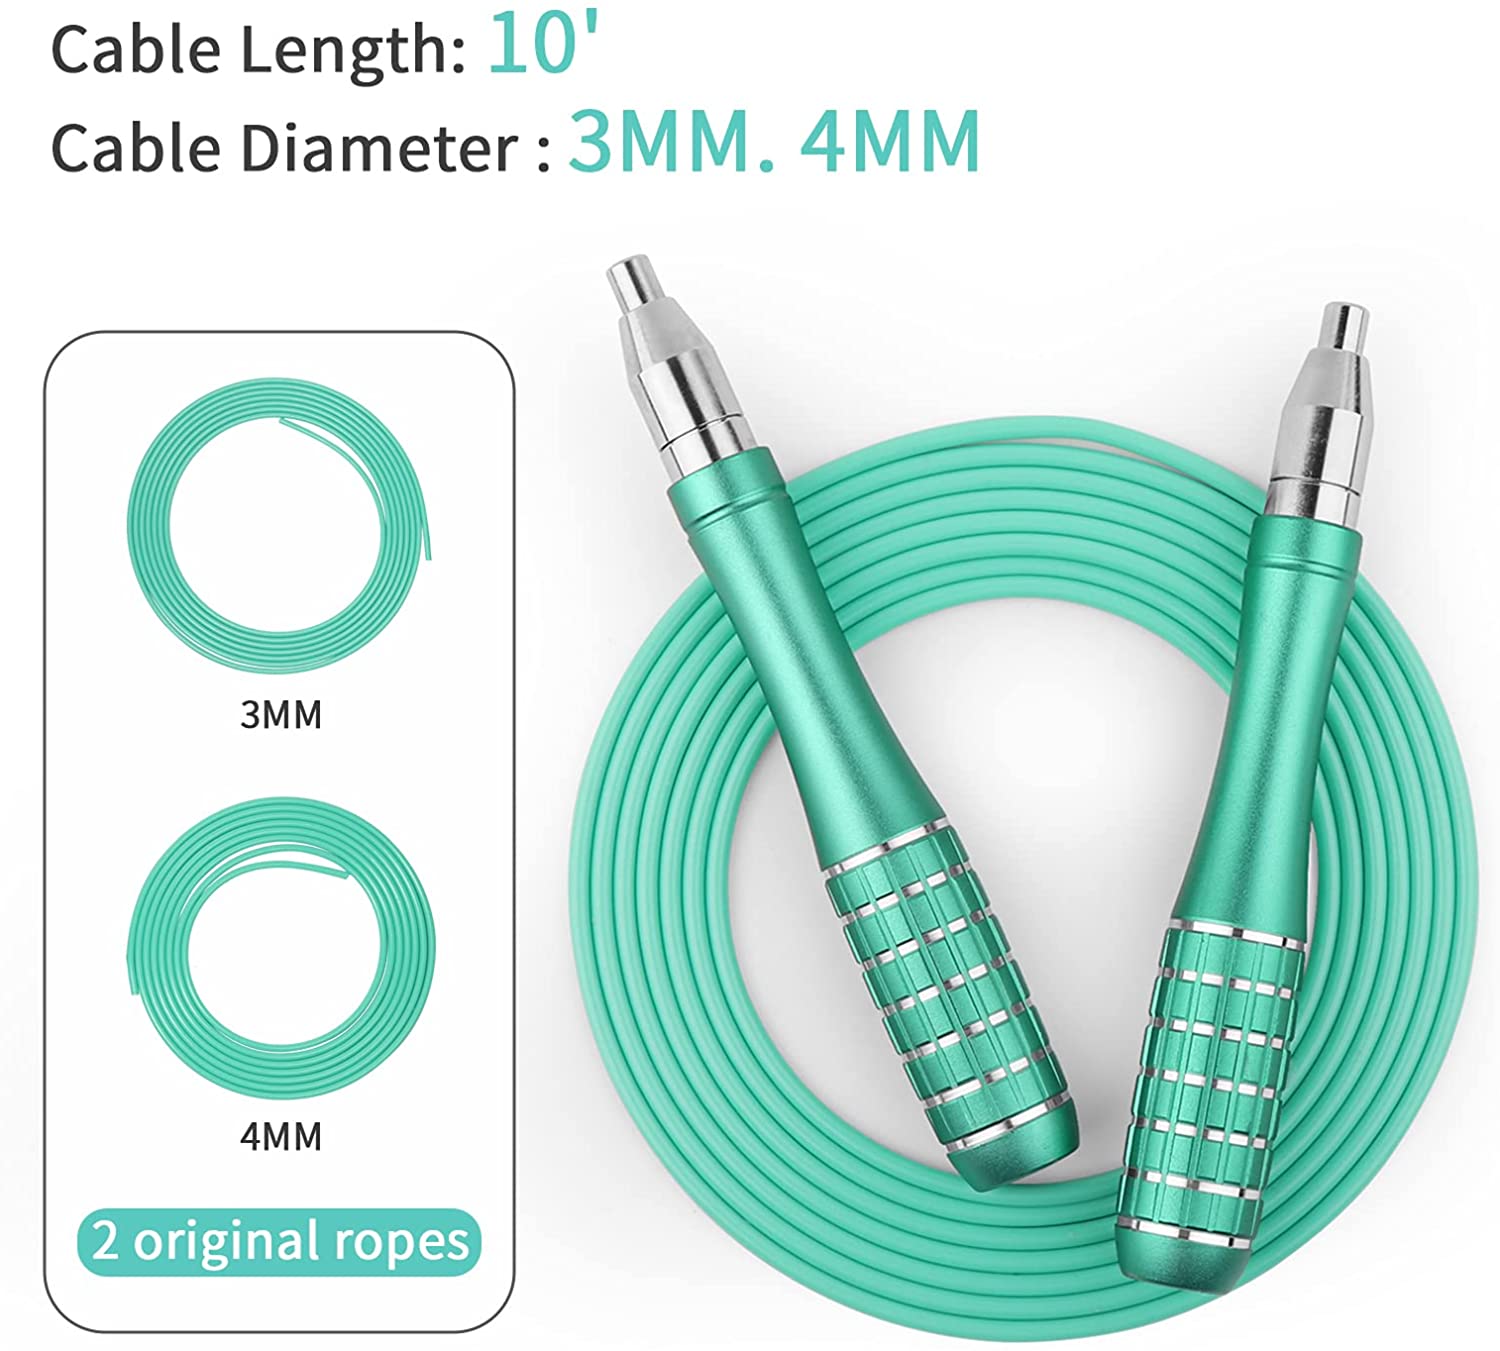 Adjustable Speed Rope (with 2 Rope Cables)